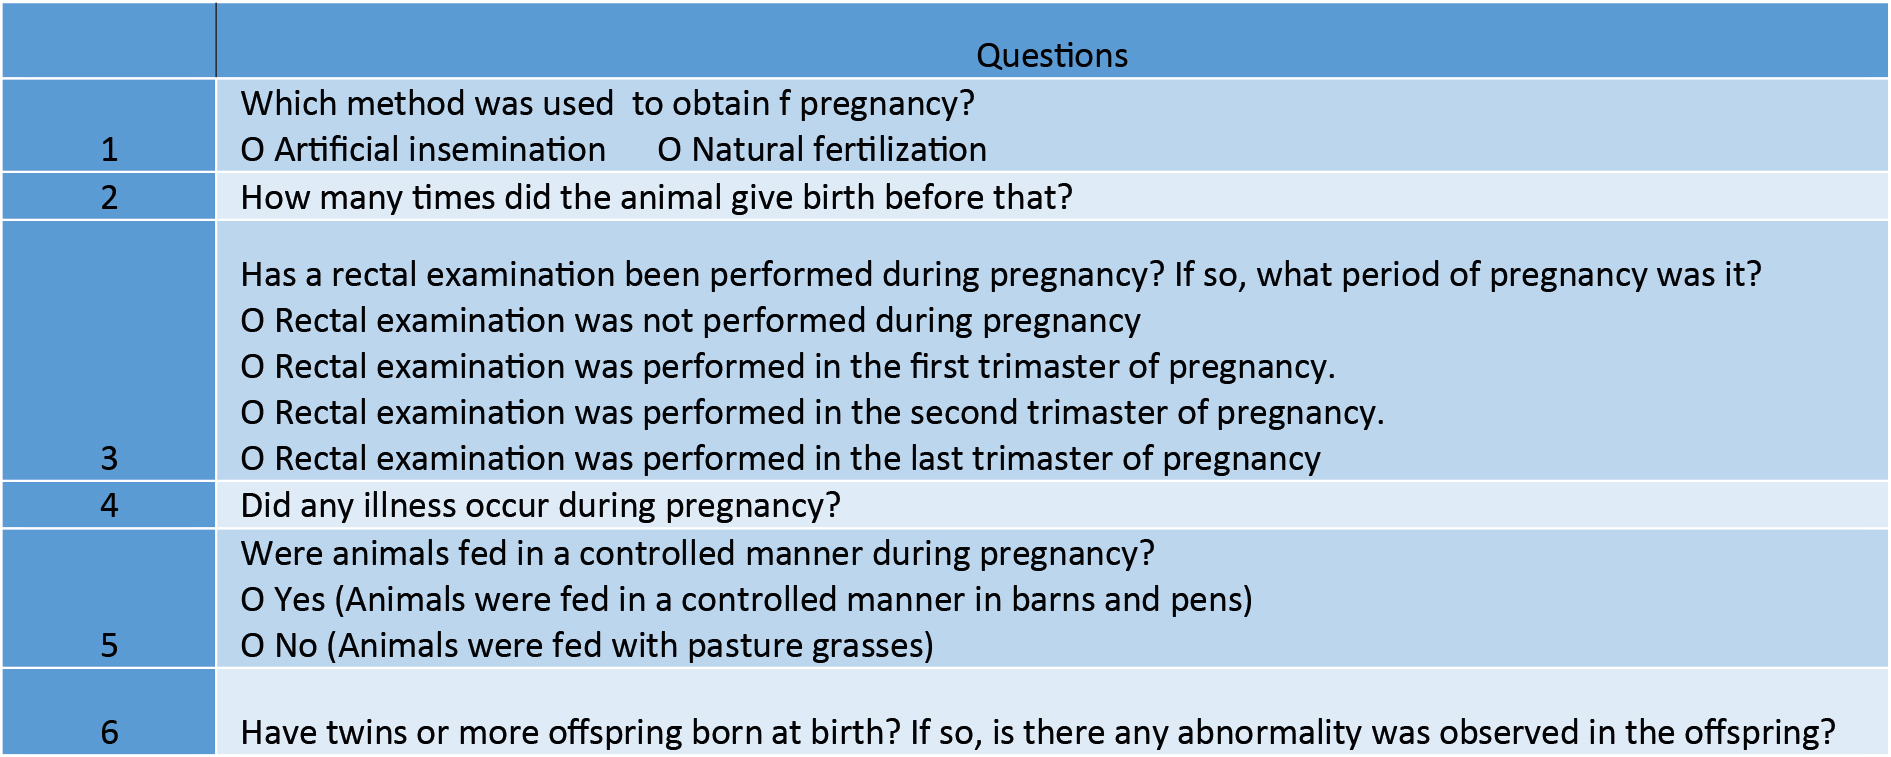 Questions asked to breeders to evaluate the etiology of congenital anomalies